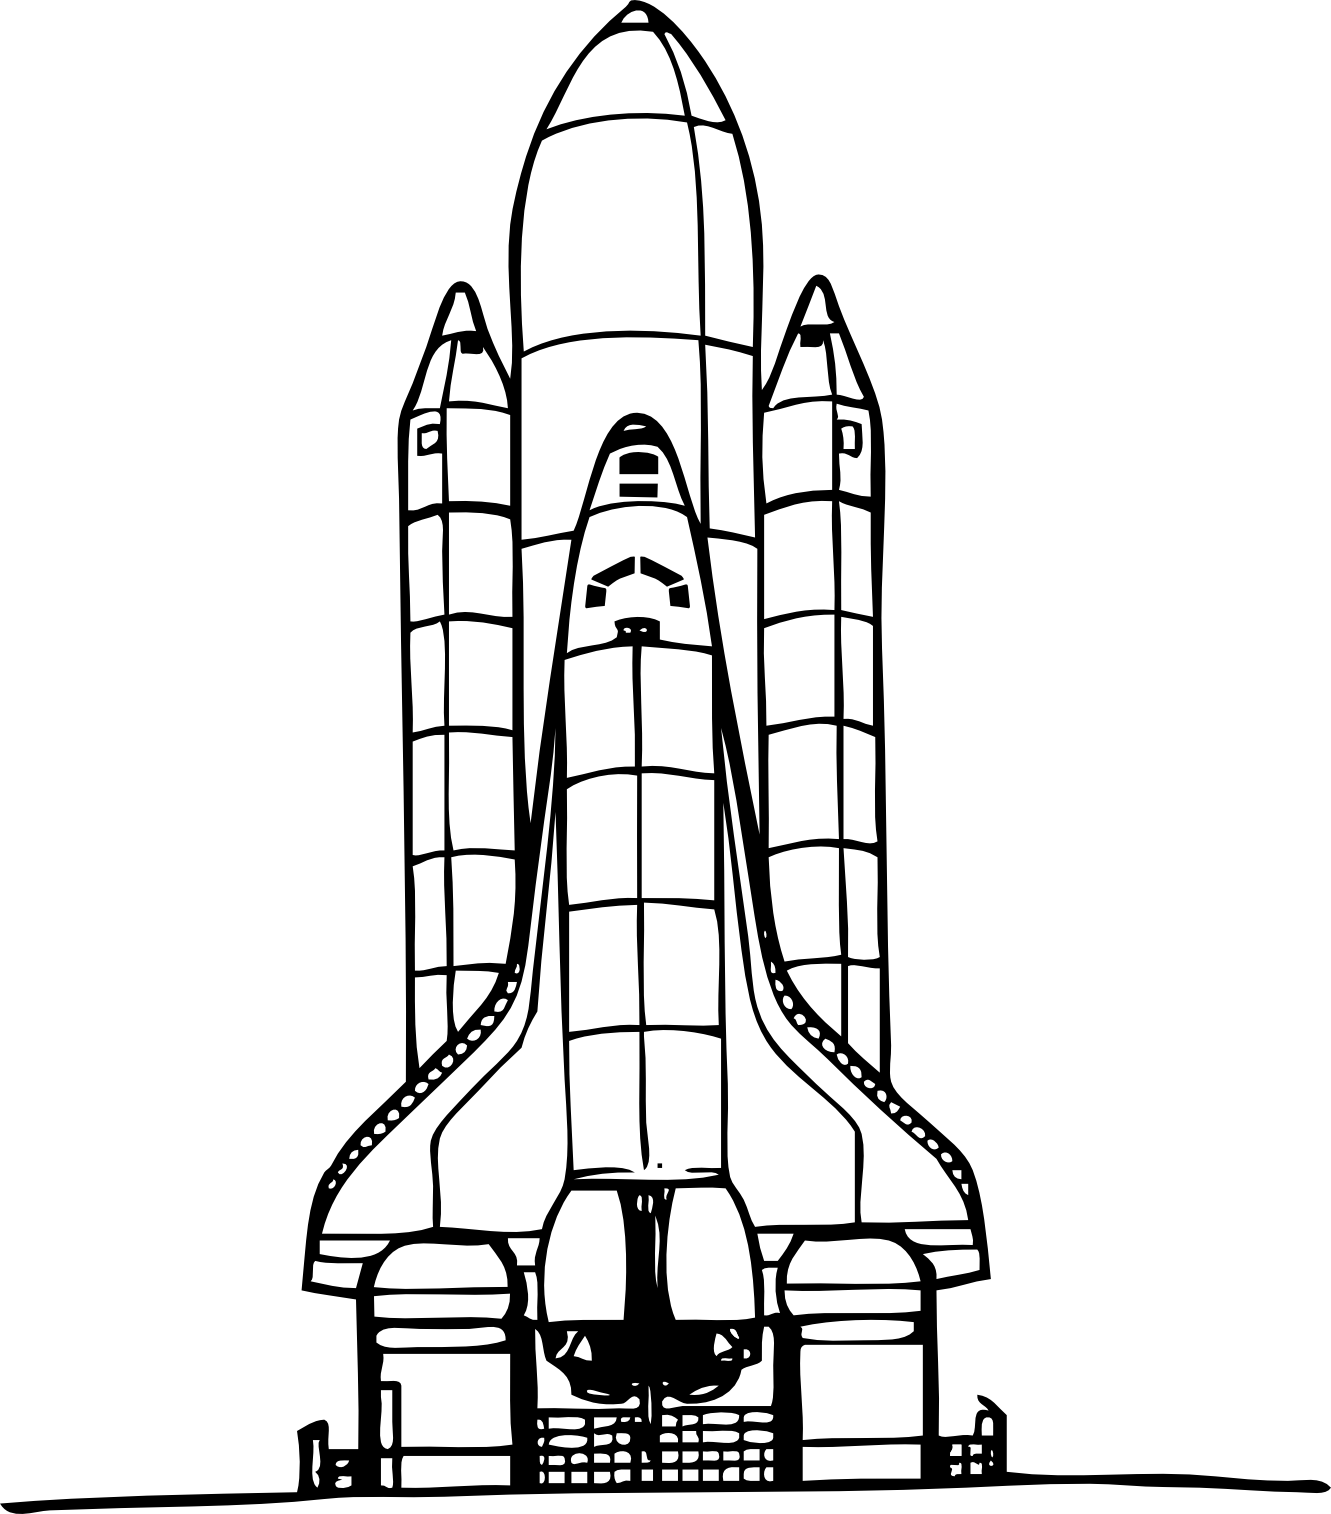 Shuttle coloring pages panda. Rocketship clipart space probe